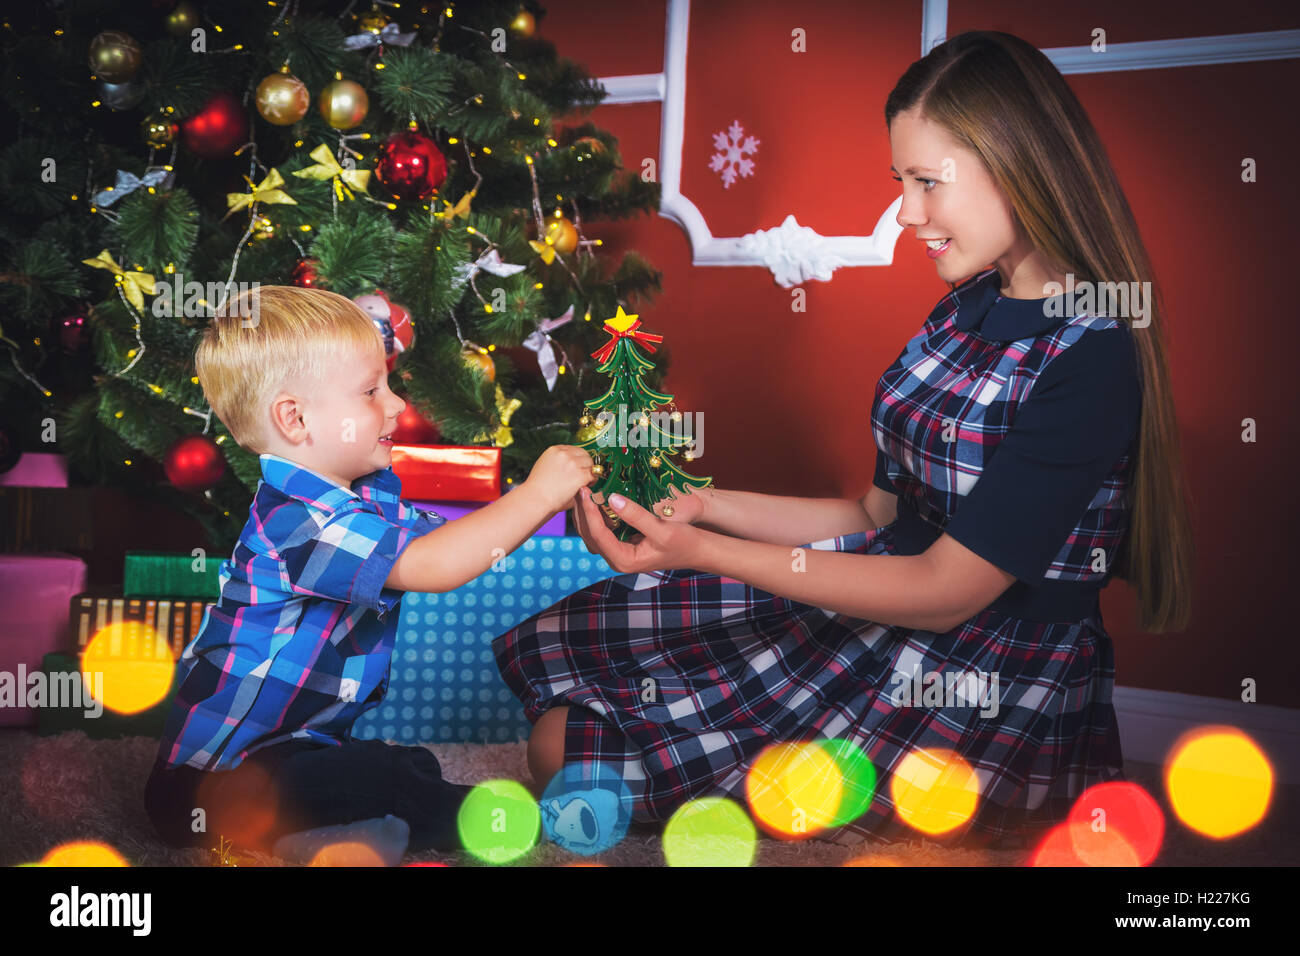 Young mother and her son near a Christmas tree in the decorated room with gifts. Stock Photo